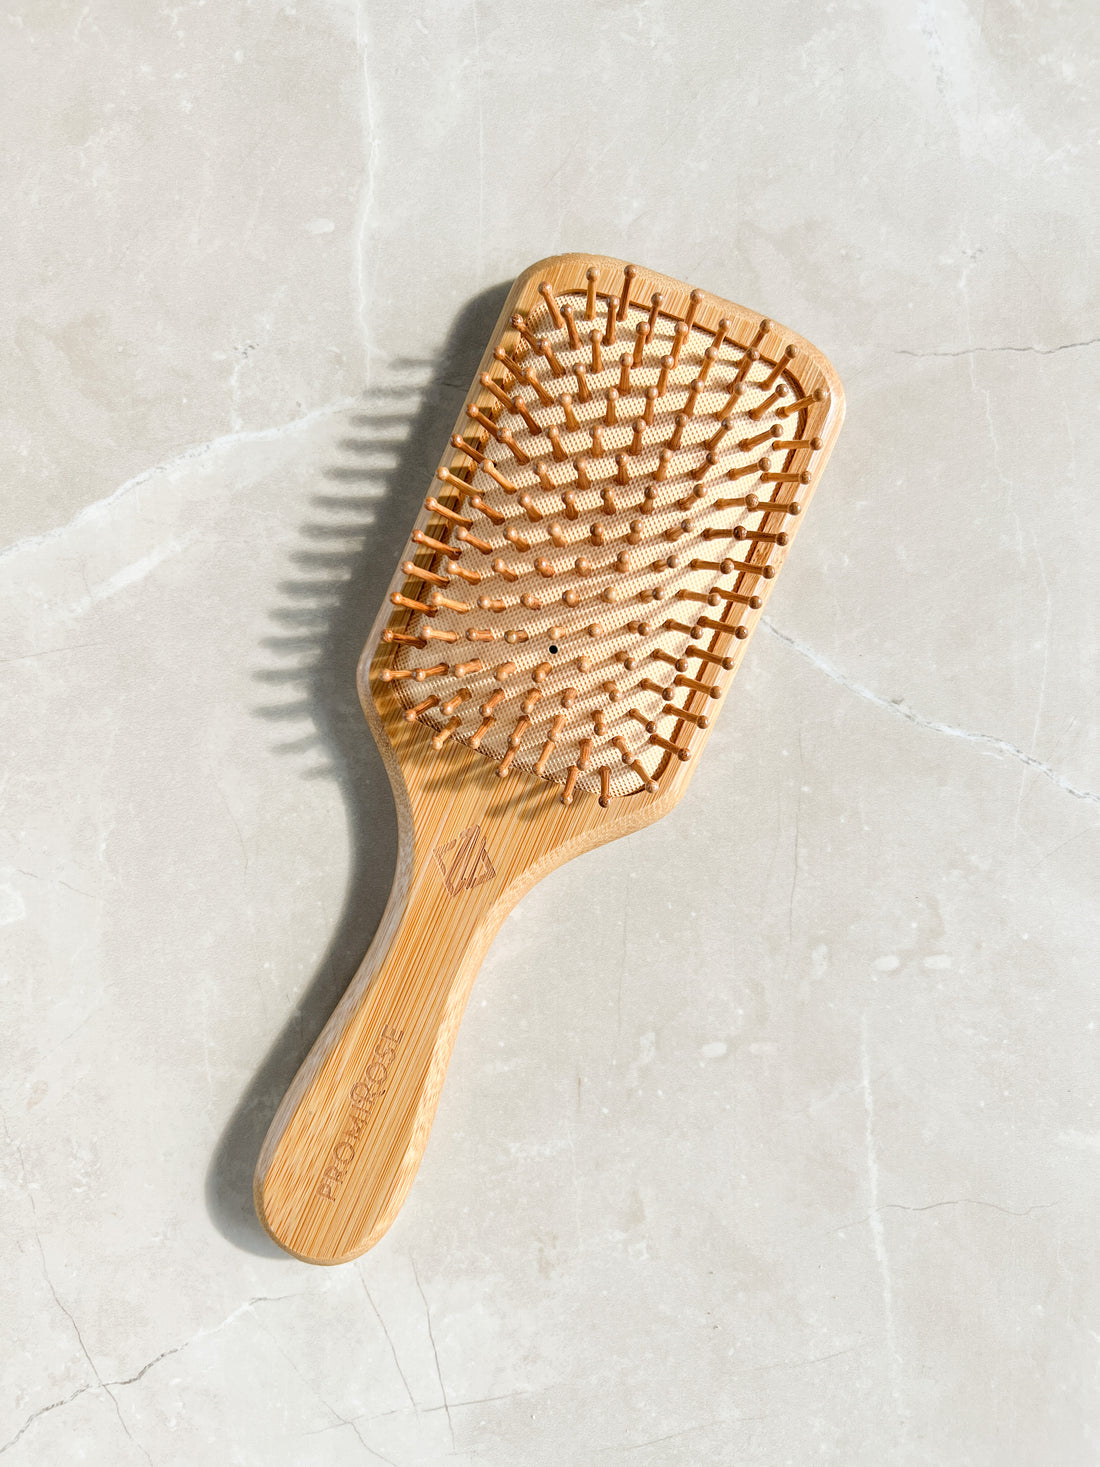 What are the Benefits of using promirose bamboo hair brush?